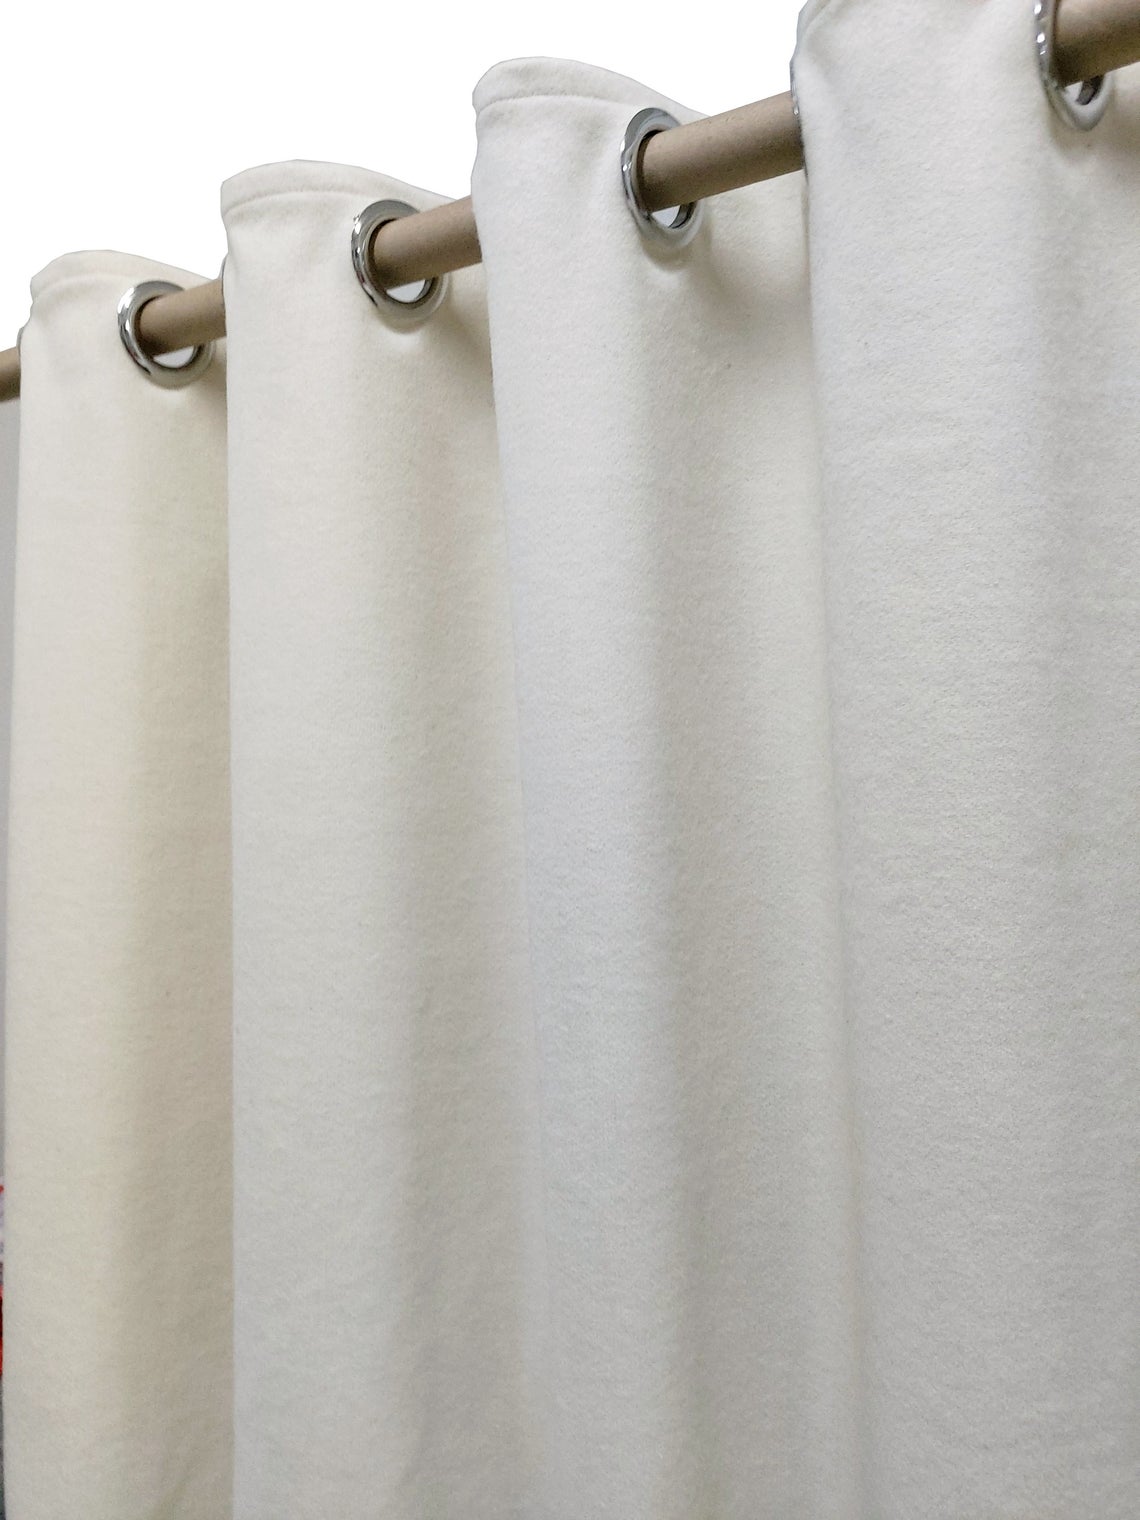 Amore Beaute curtains will not only decorate your room, but also help with insulation (blocks draft in the winter months), soundproofing and light reduction.